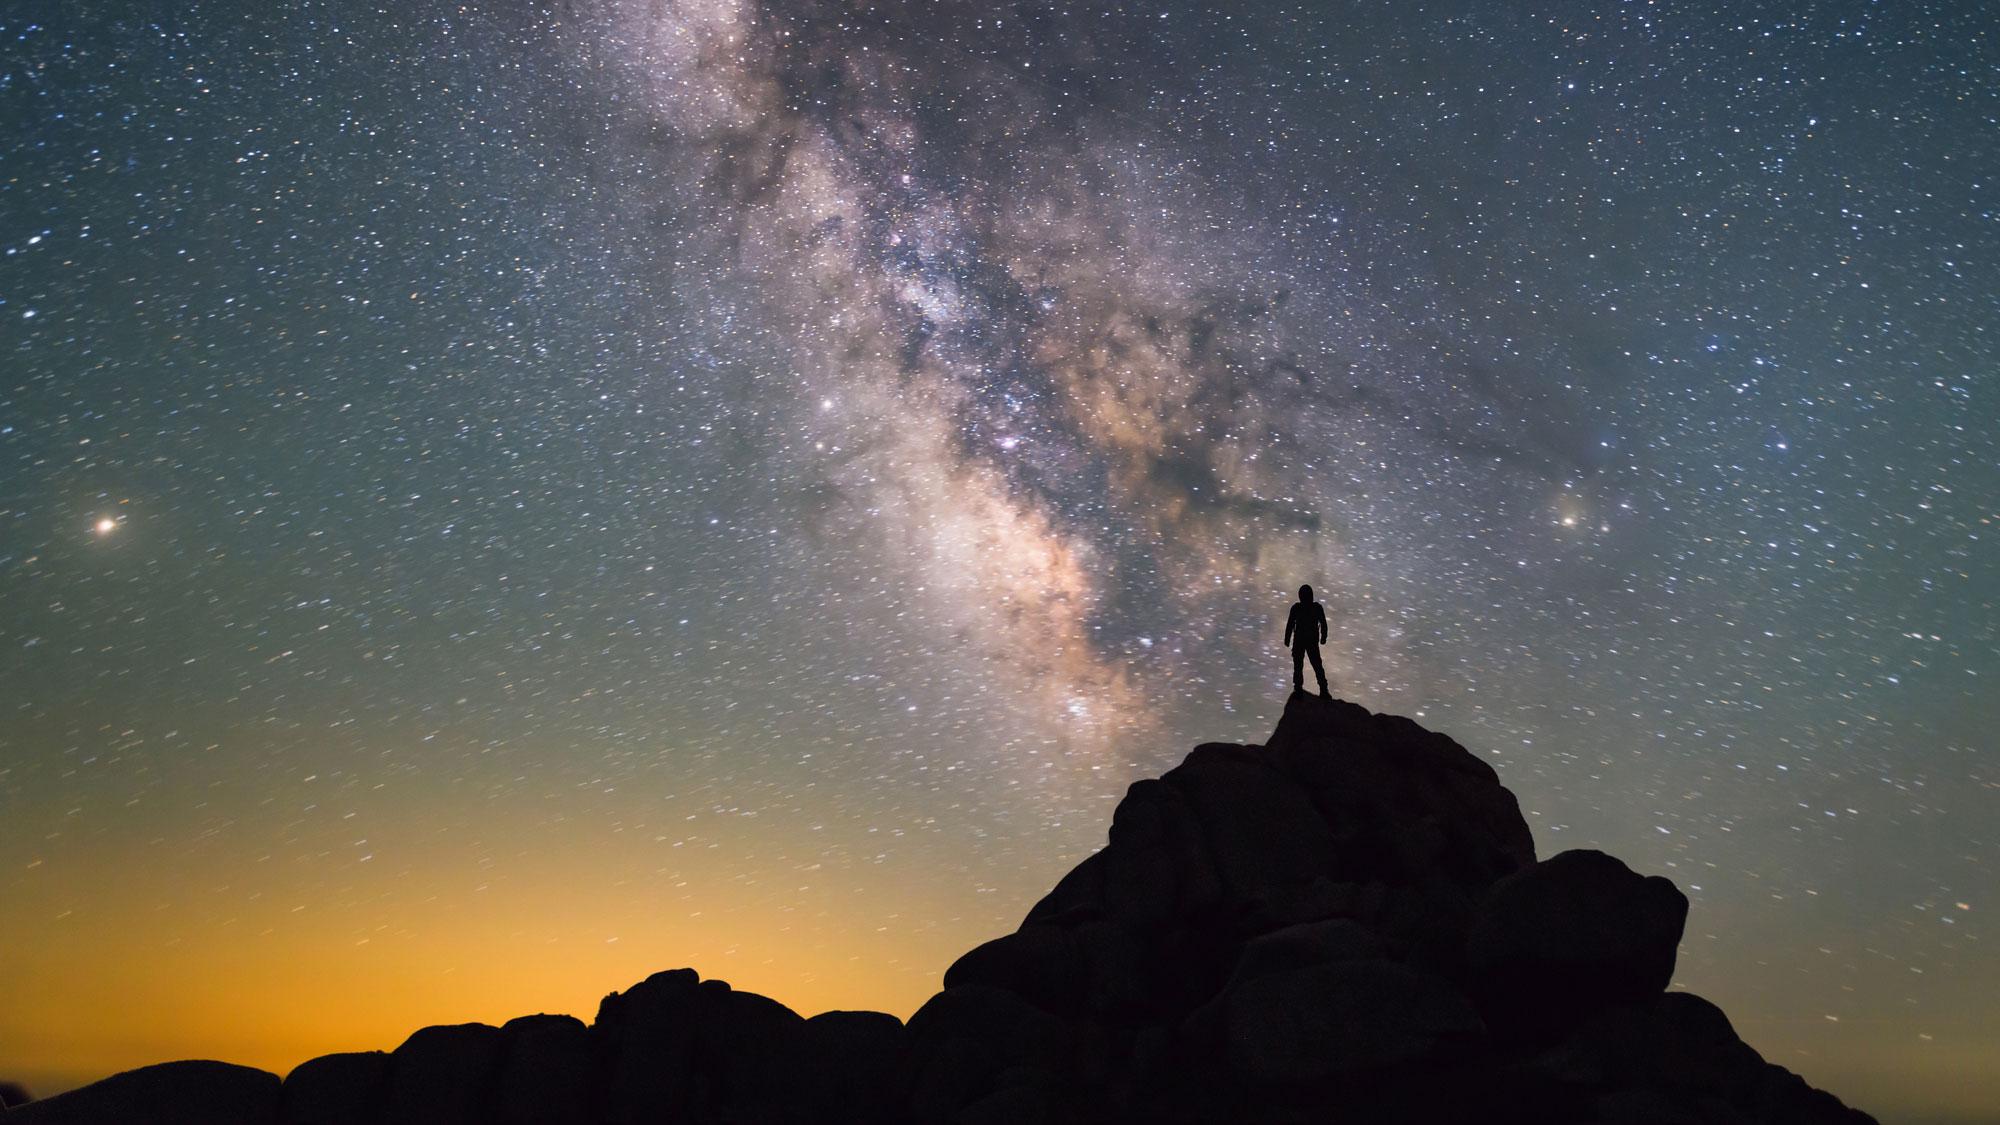 A person stands atop a small mountain in the foreground facing a star filled sky